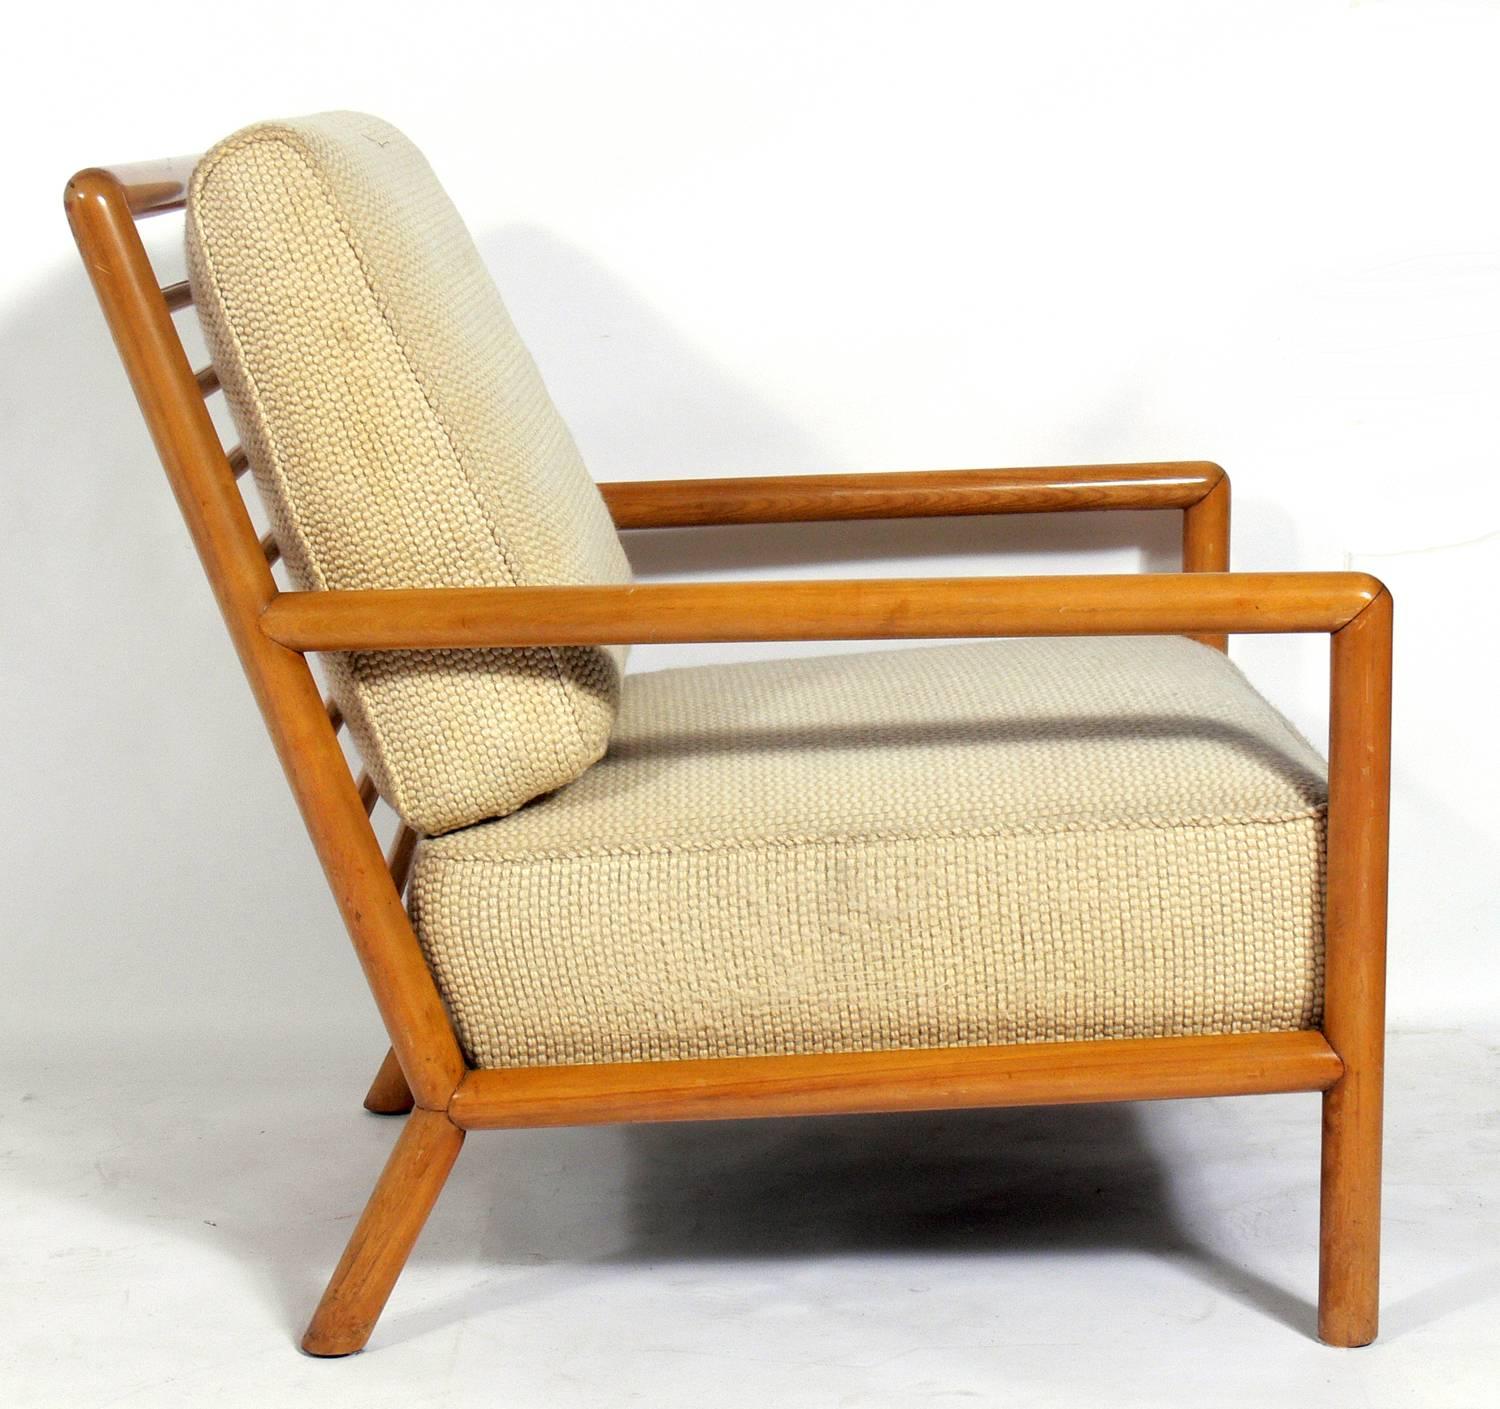 Large-scale modern lounge chair, designed by T.H. Robsjohn-Gibbings for Widdicomb, circa 1950s. This chair is currently being refinished and reupholstered and can be completed in your choice of color and your fabric. The price noted below includes